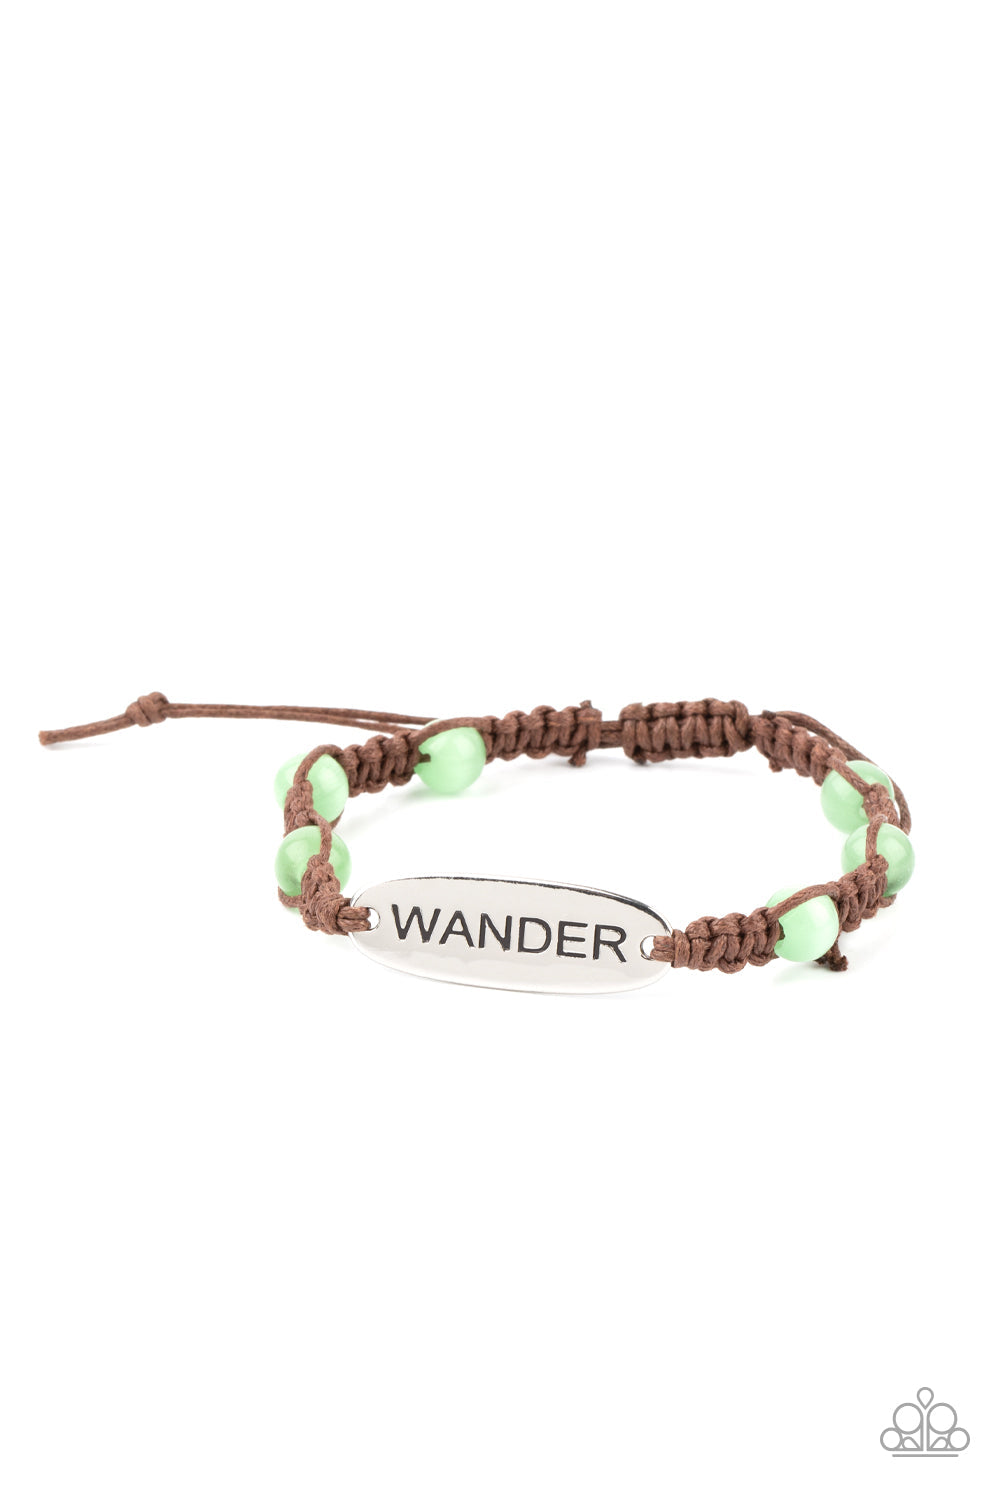 Roaming For Days - Green Cat's Eye Stones & Silver "Wander" Stamped Plate Paparazzi Urban Bracelet